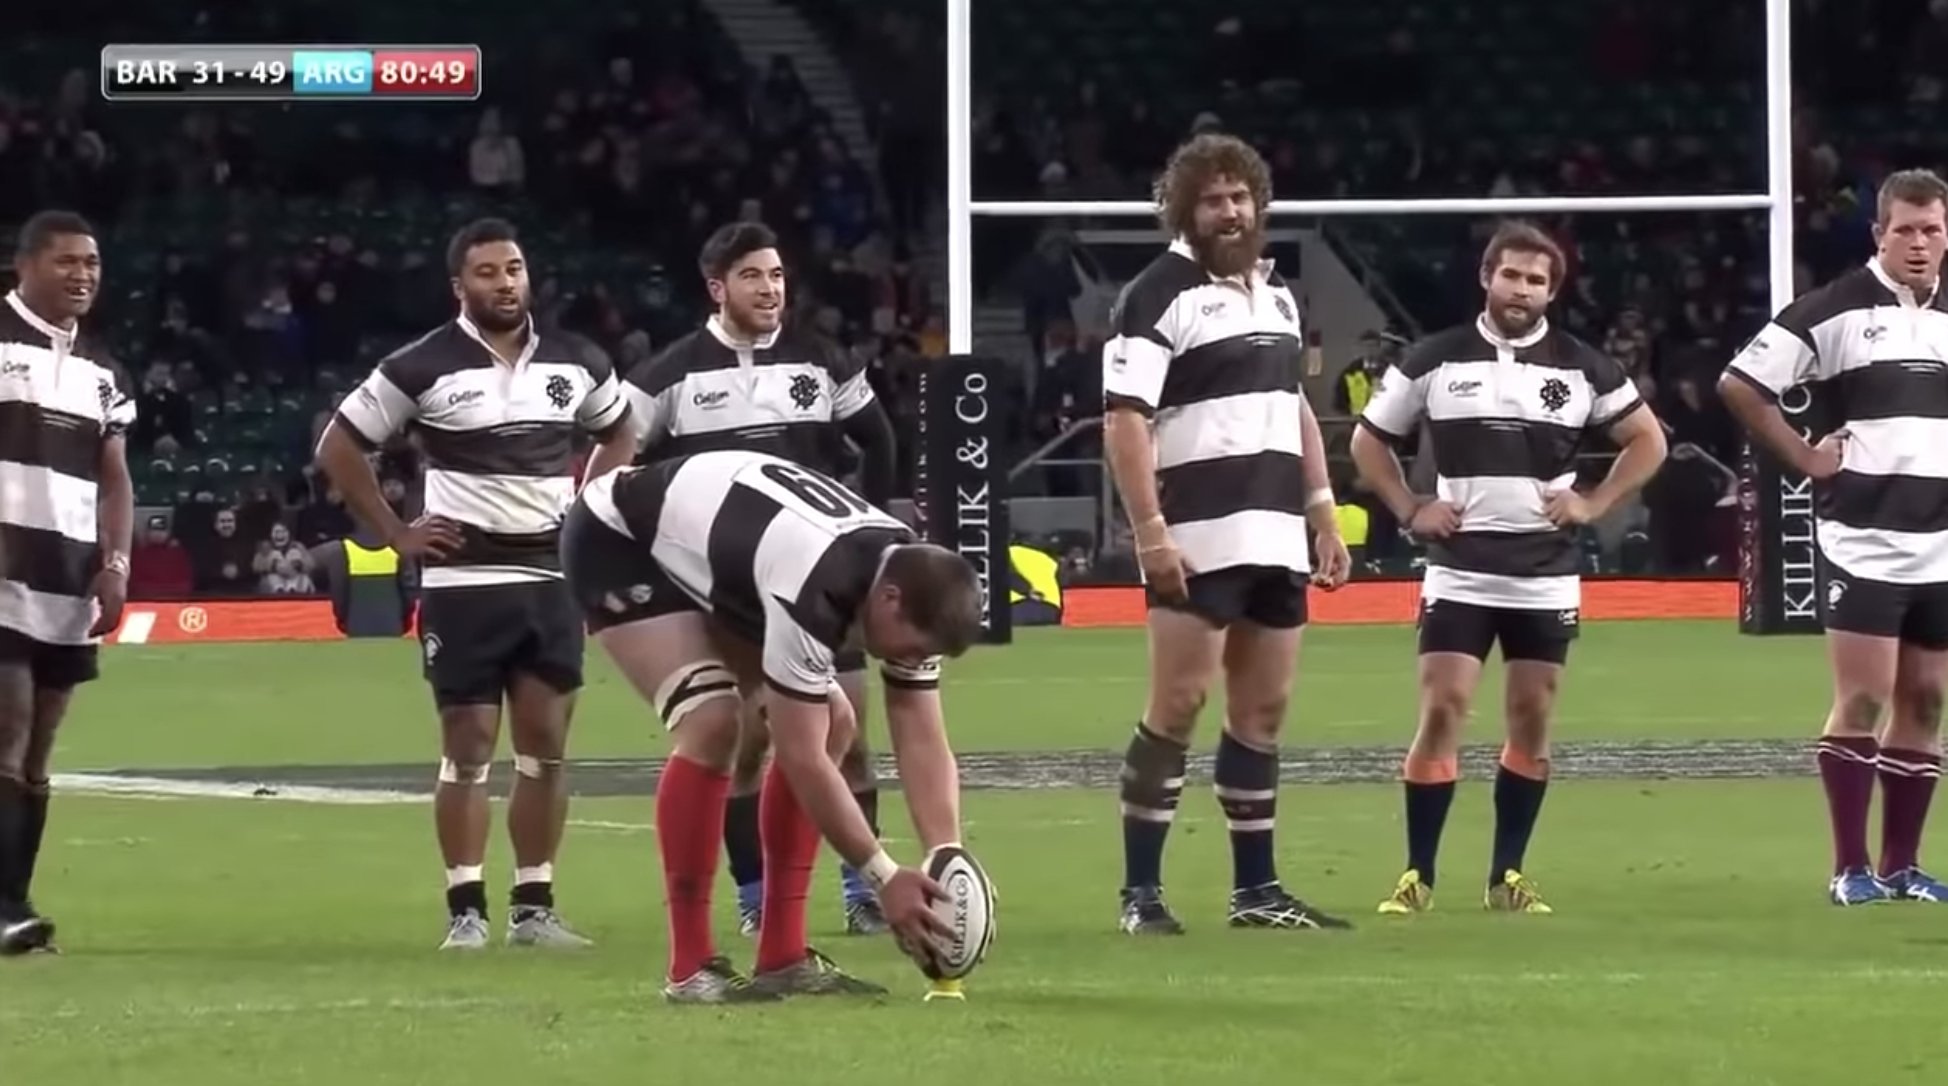 VIDEO: A compilation has been made of some the Barbarians' CRAZIEST moments and it's as expected... NUTS